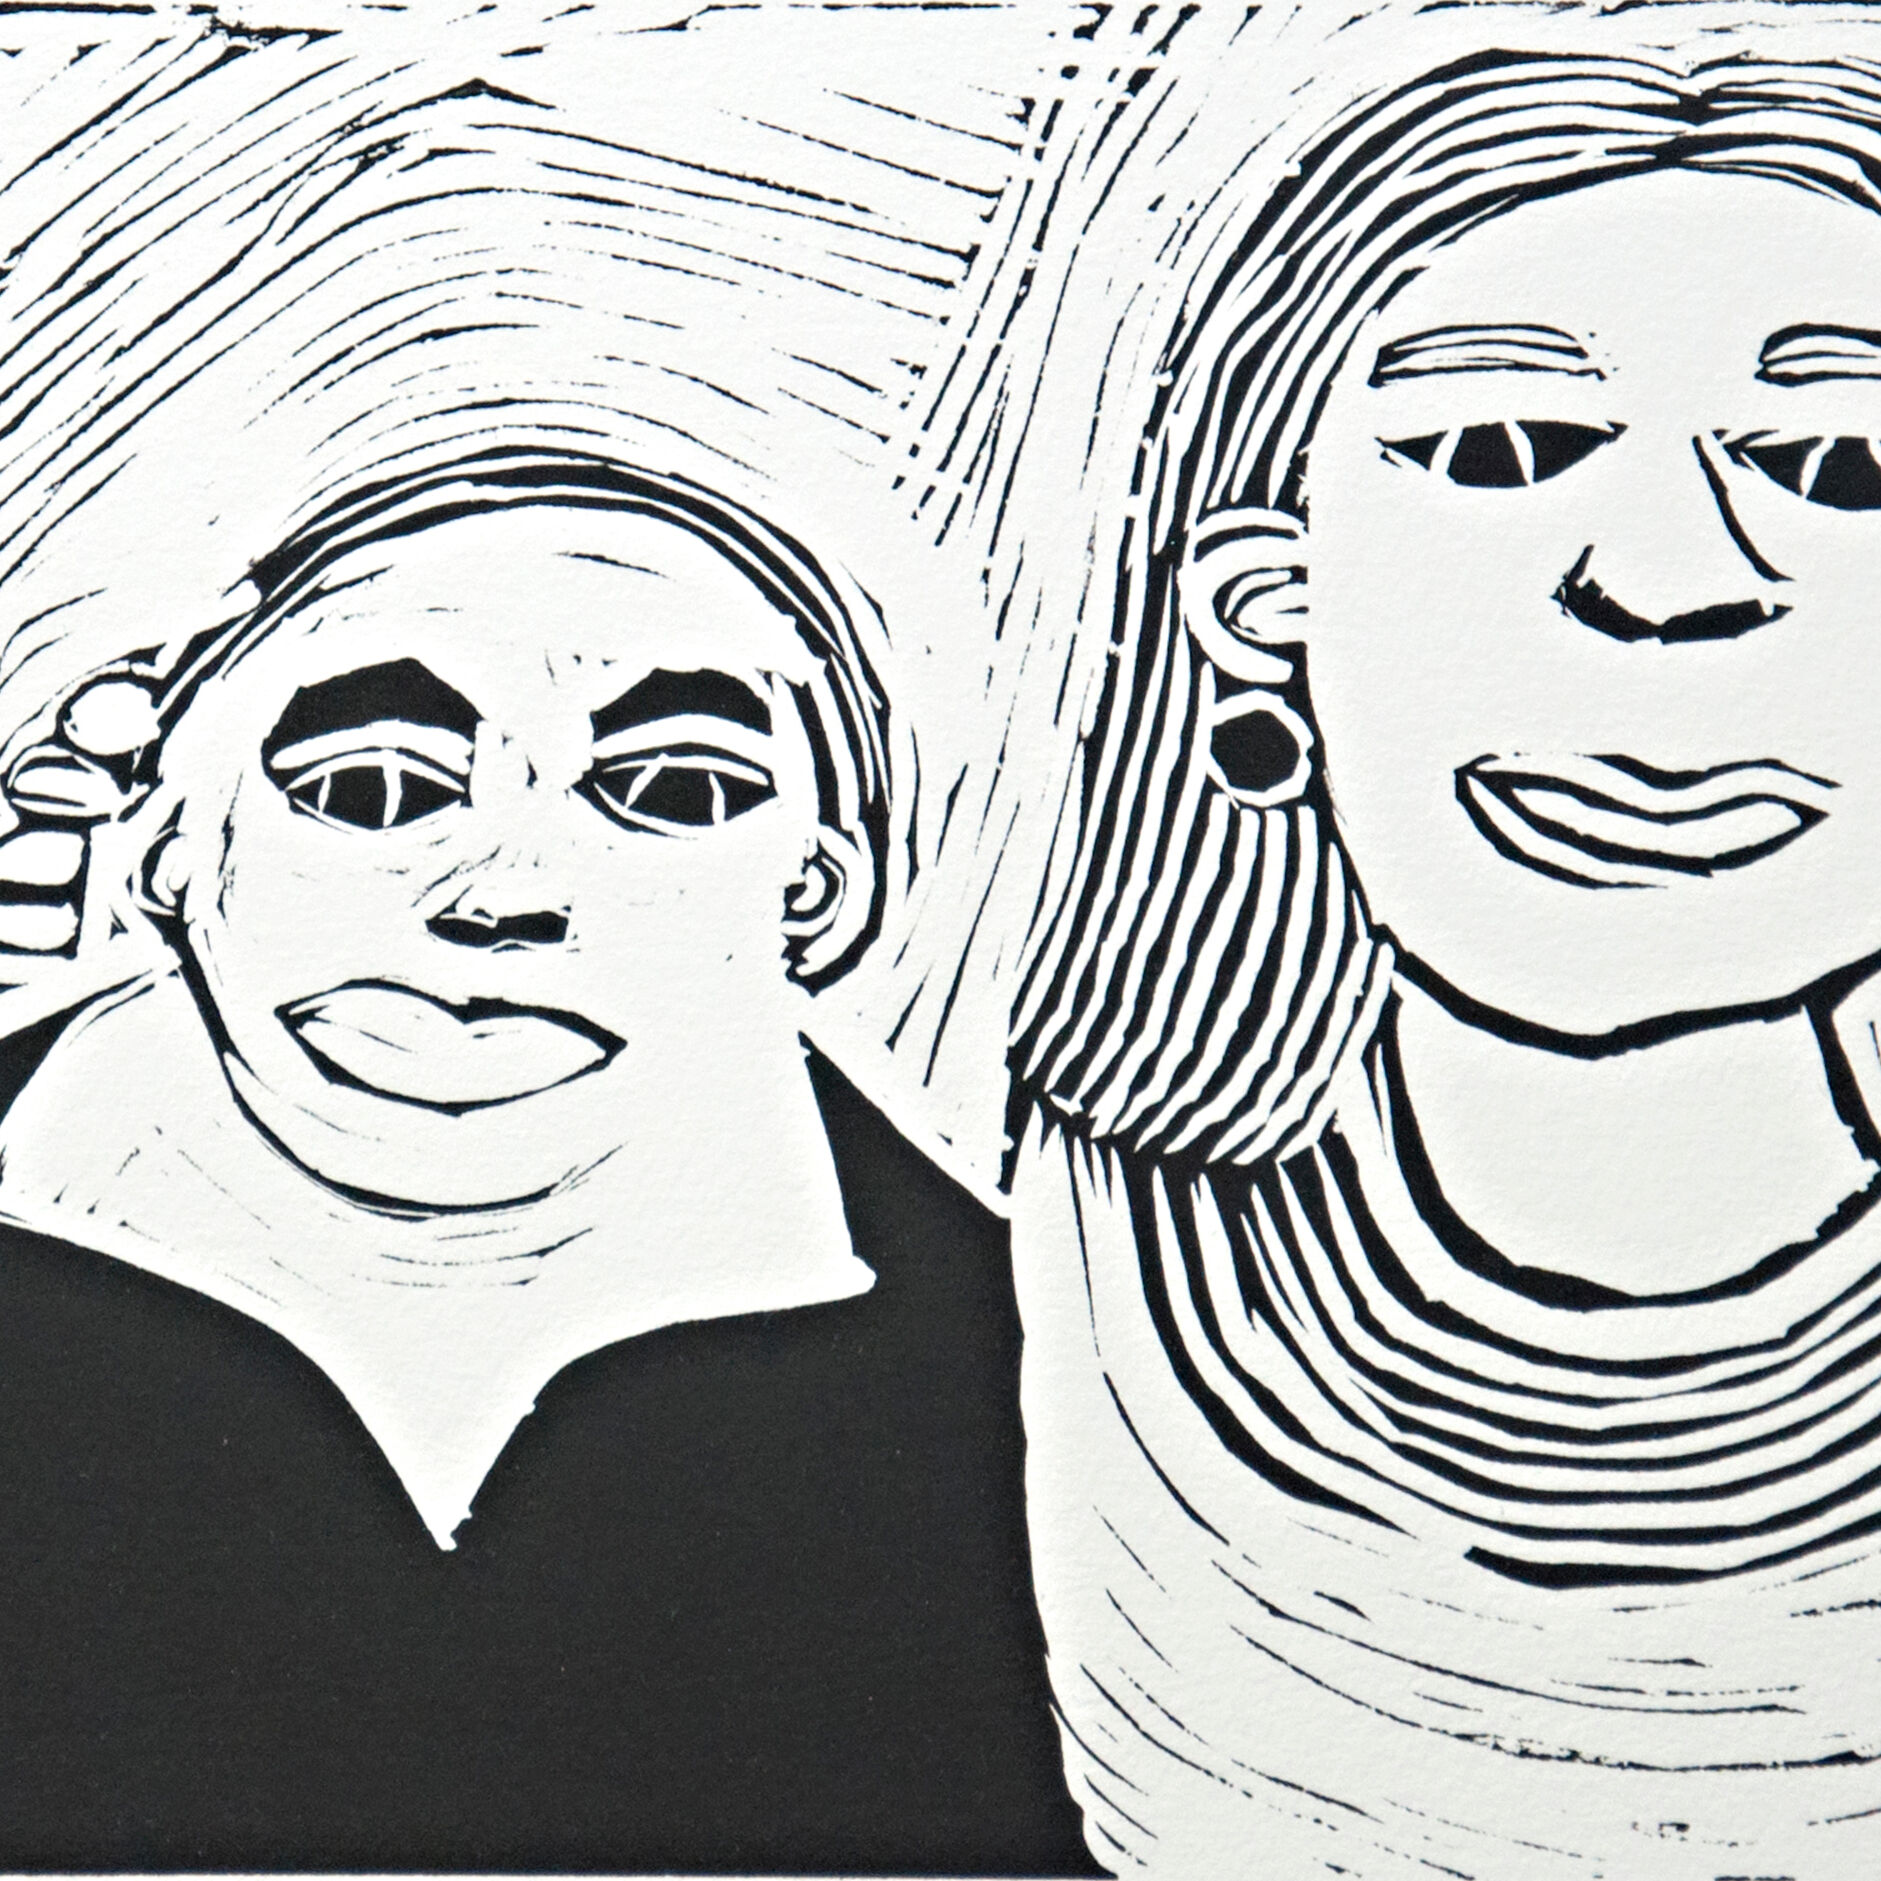 Fiona Taylor, Fiona and Nicole Livingstone, 2017, linocut, edition of 3, 20.5 x 30cm
Courtesy the artist and Arts Project Australia, Melbourne
